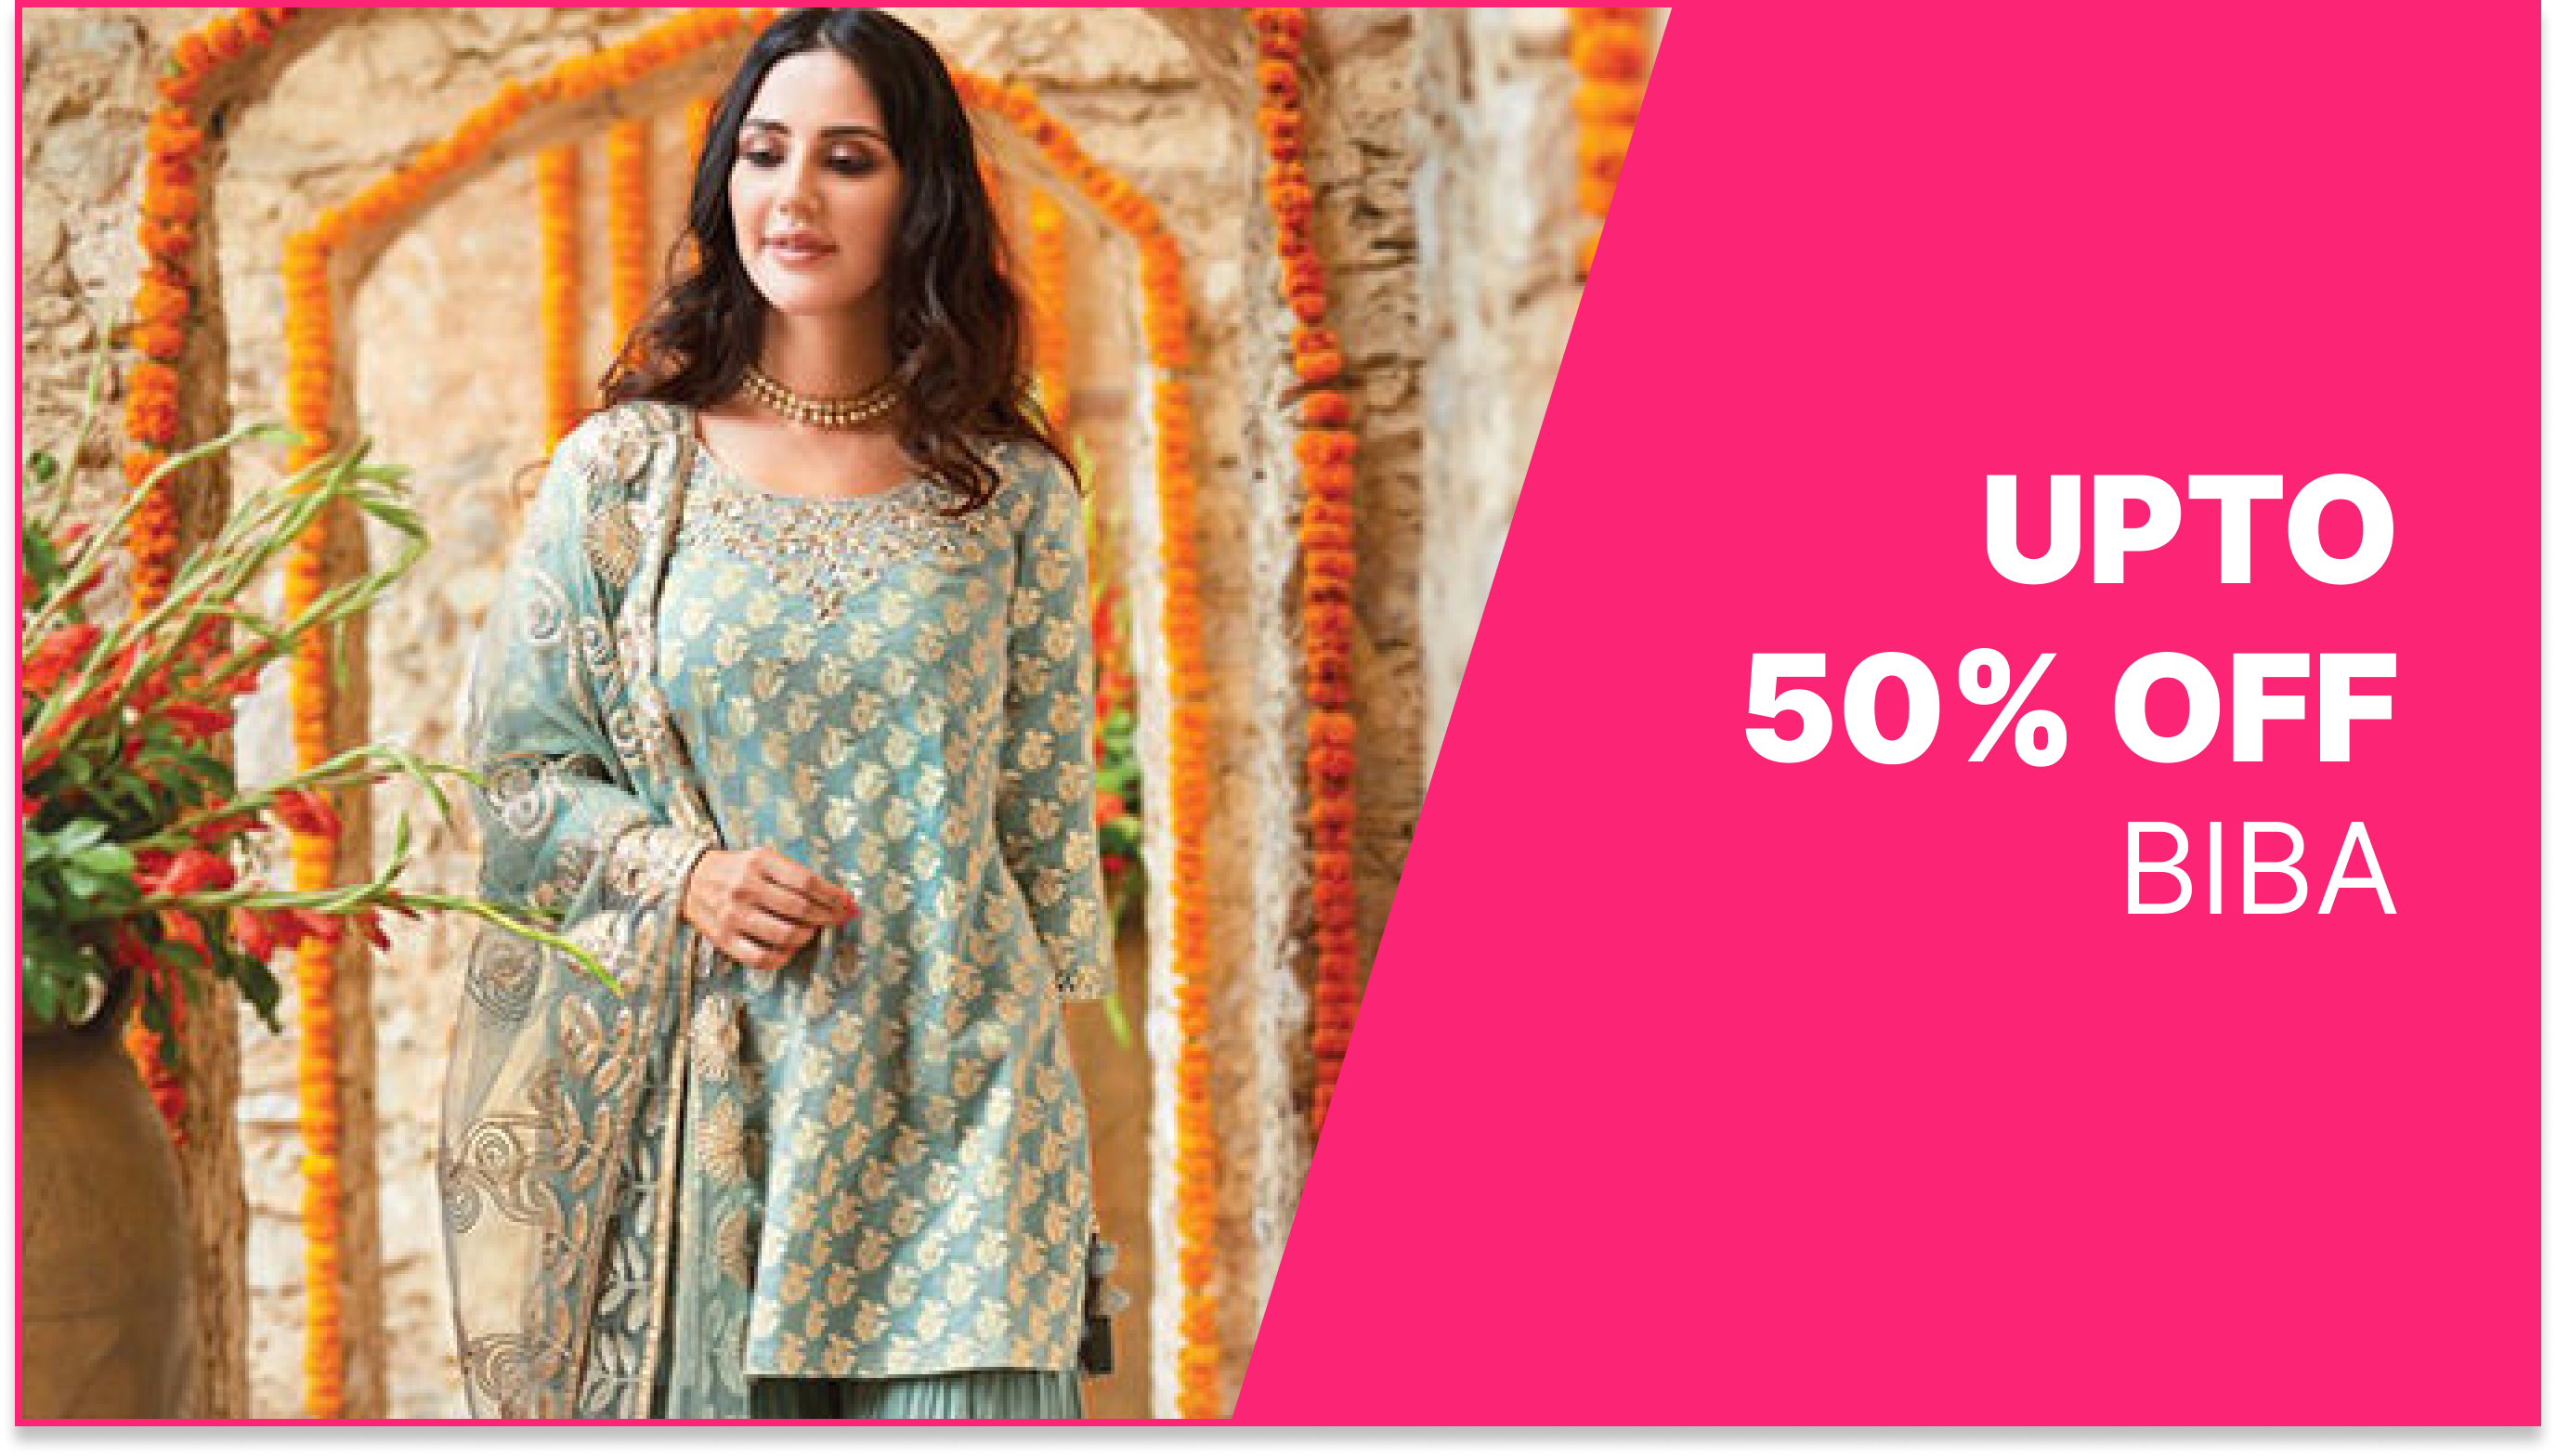 Biba | Up to 50% off Extra 10% off*